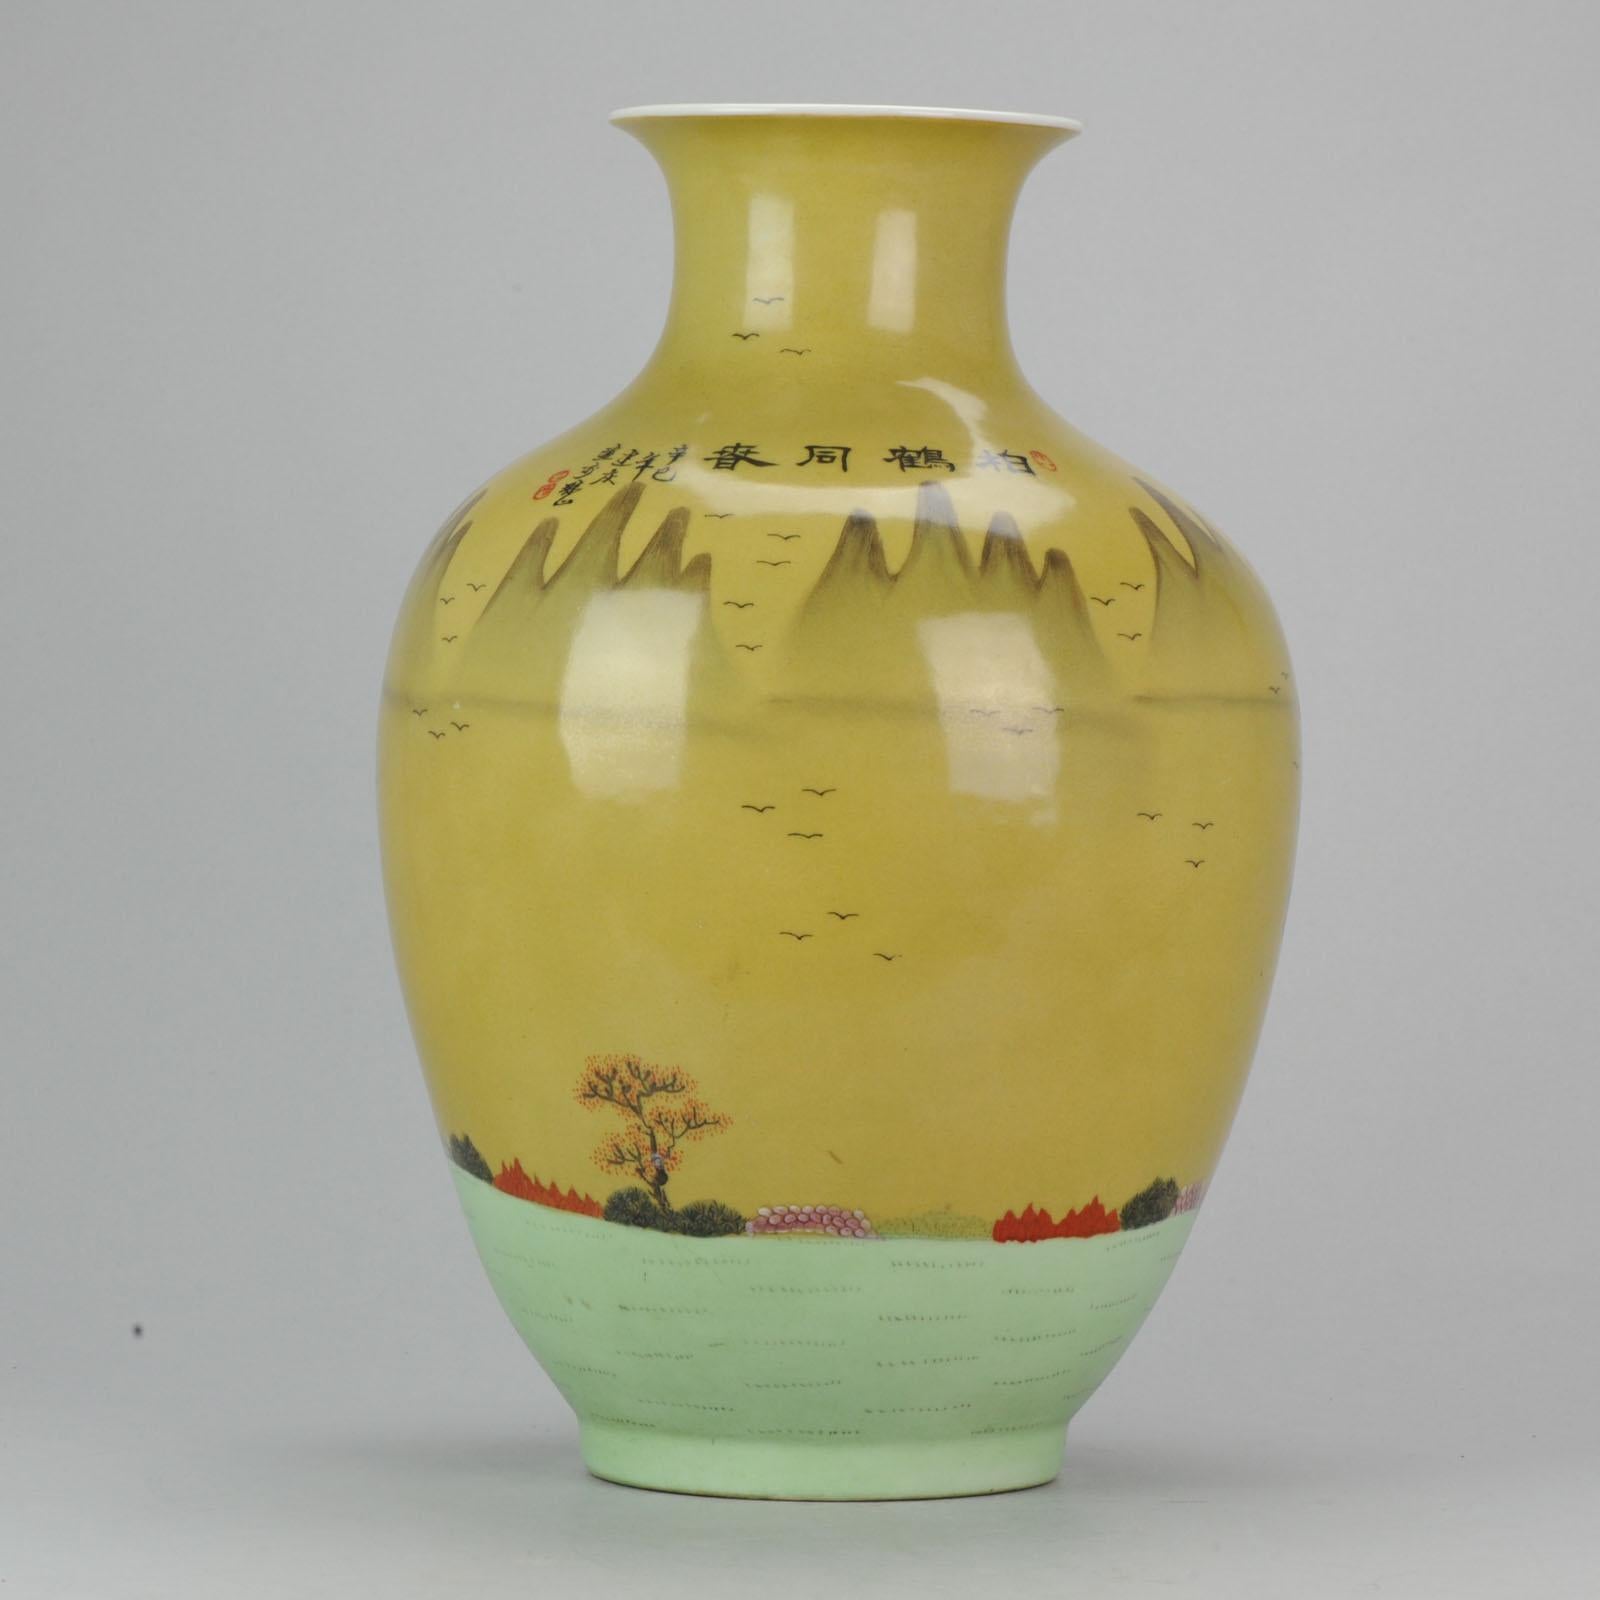 Very nice vase with a stunning decoration. High quality hand painted.

Condition
Overall condition perfect. Size: 400mm height

Period
20th century PRoC (1949 - now).